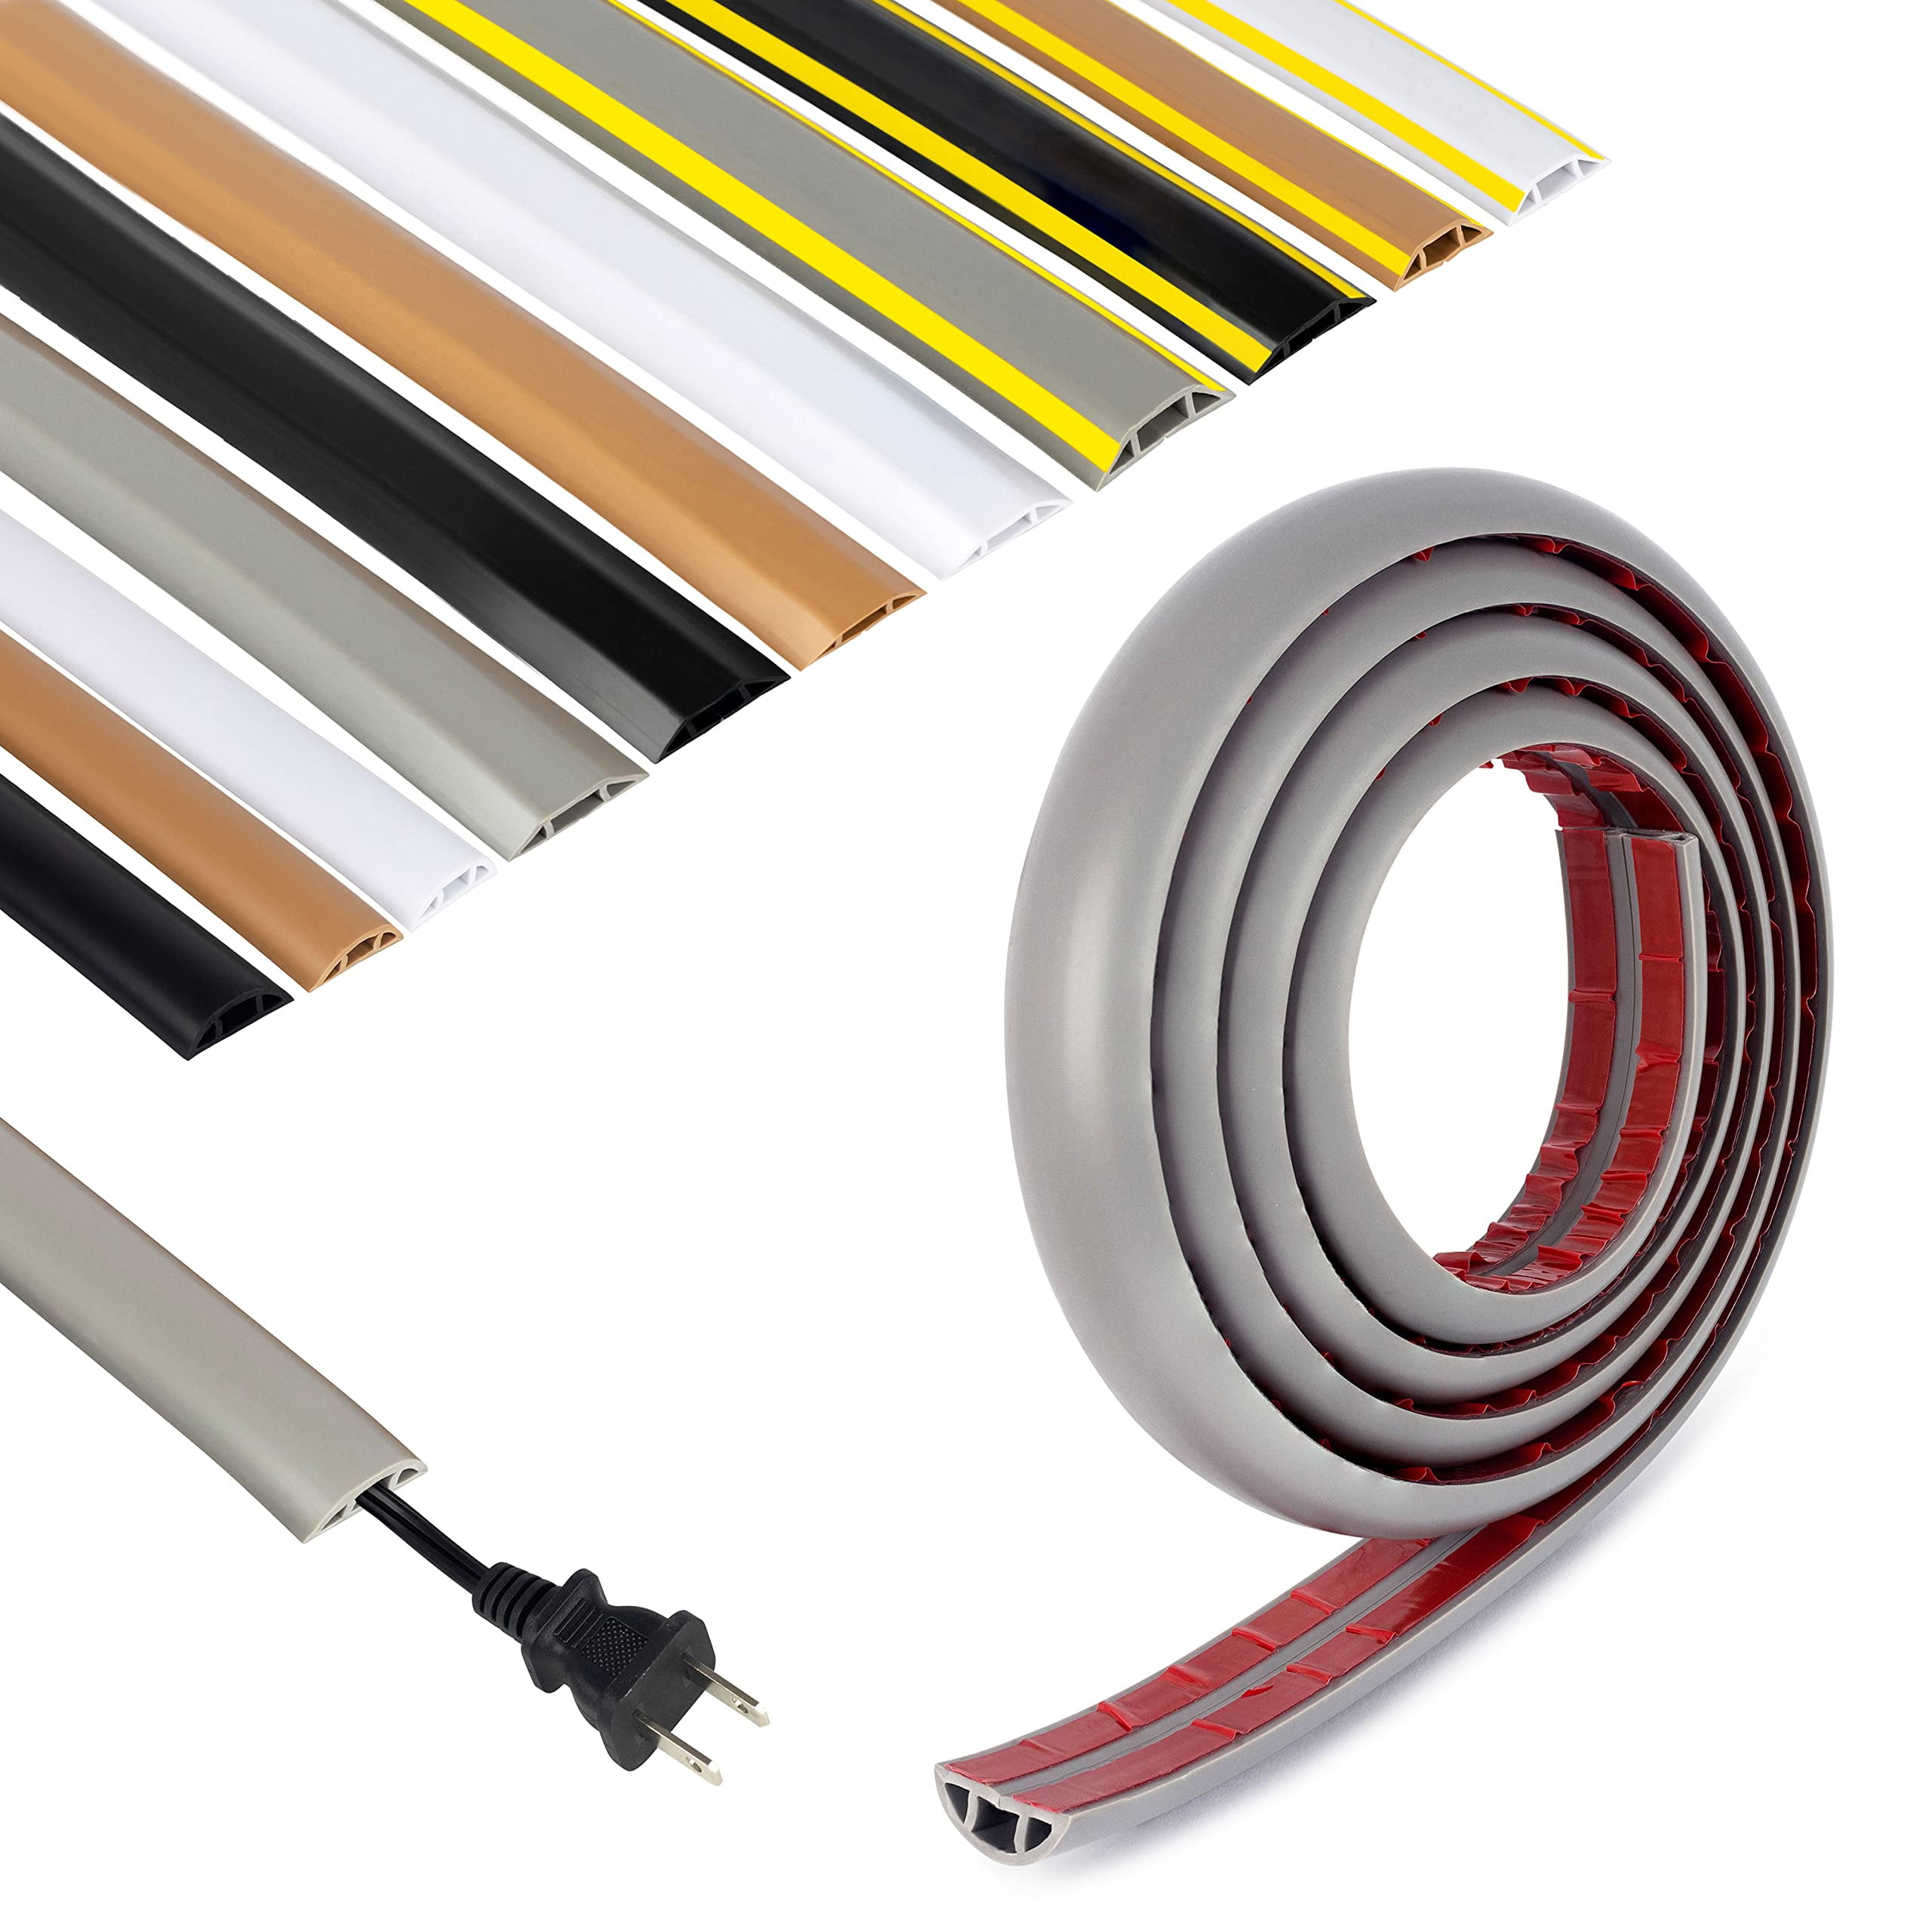 Rubber Bond Cord Cover Floor Cable Protector - Strong Self Adhesive Floor  Cord Covers for Wires - Low Profile Extension Cord Covers for Floor & Wall  - Grey - Thin Cord - 4 Feet 